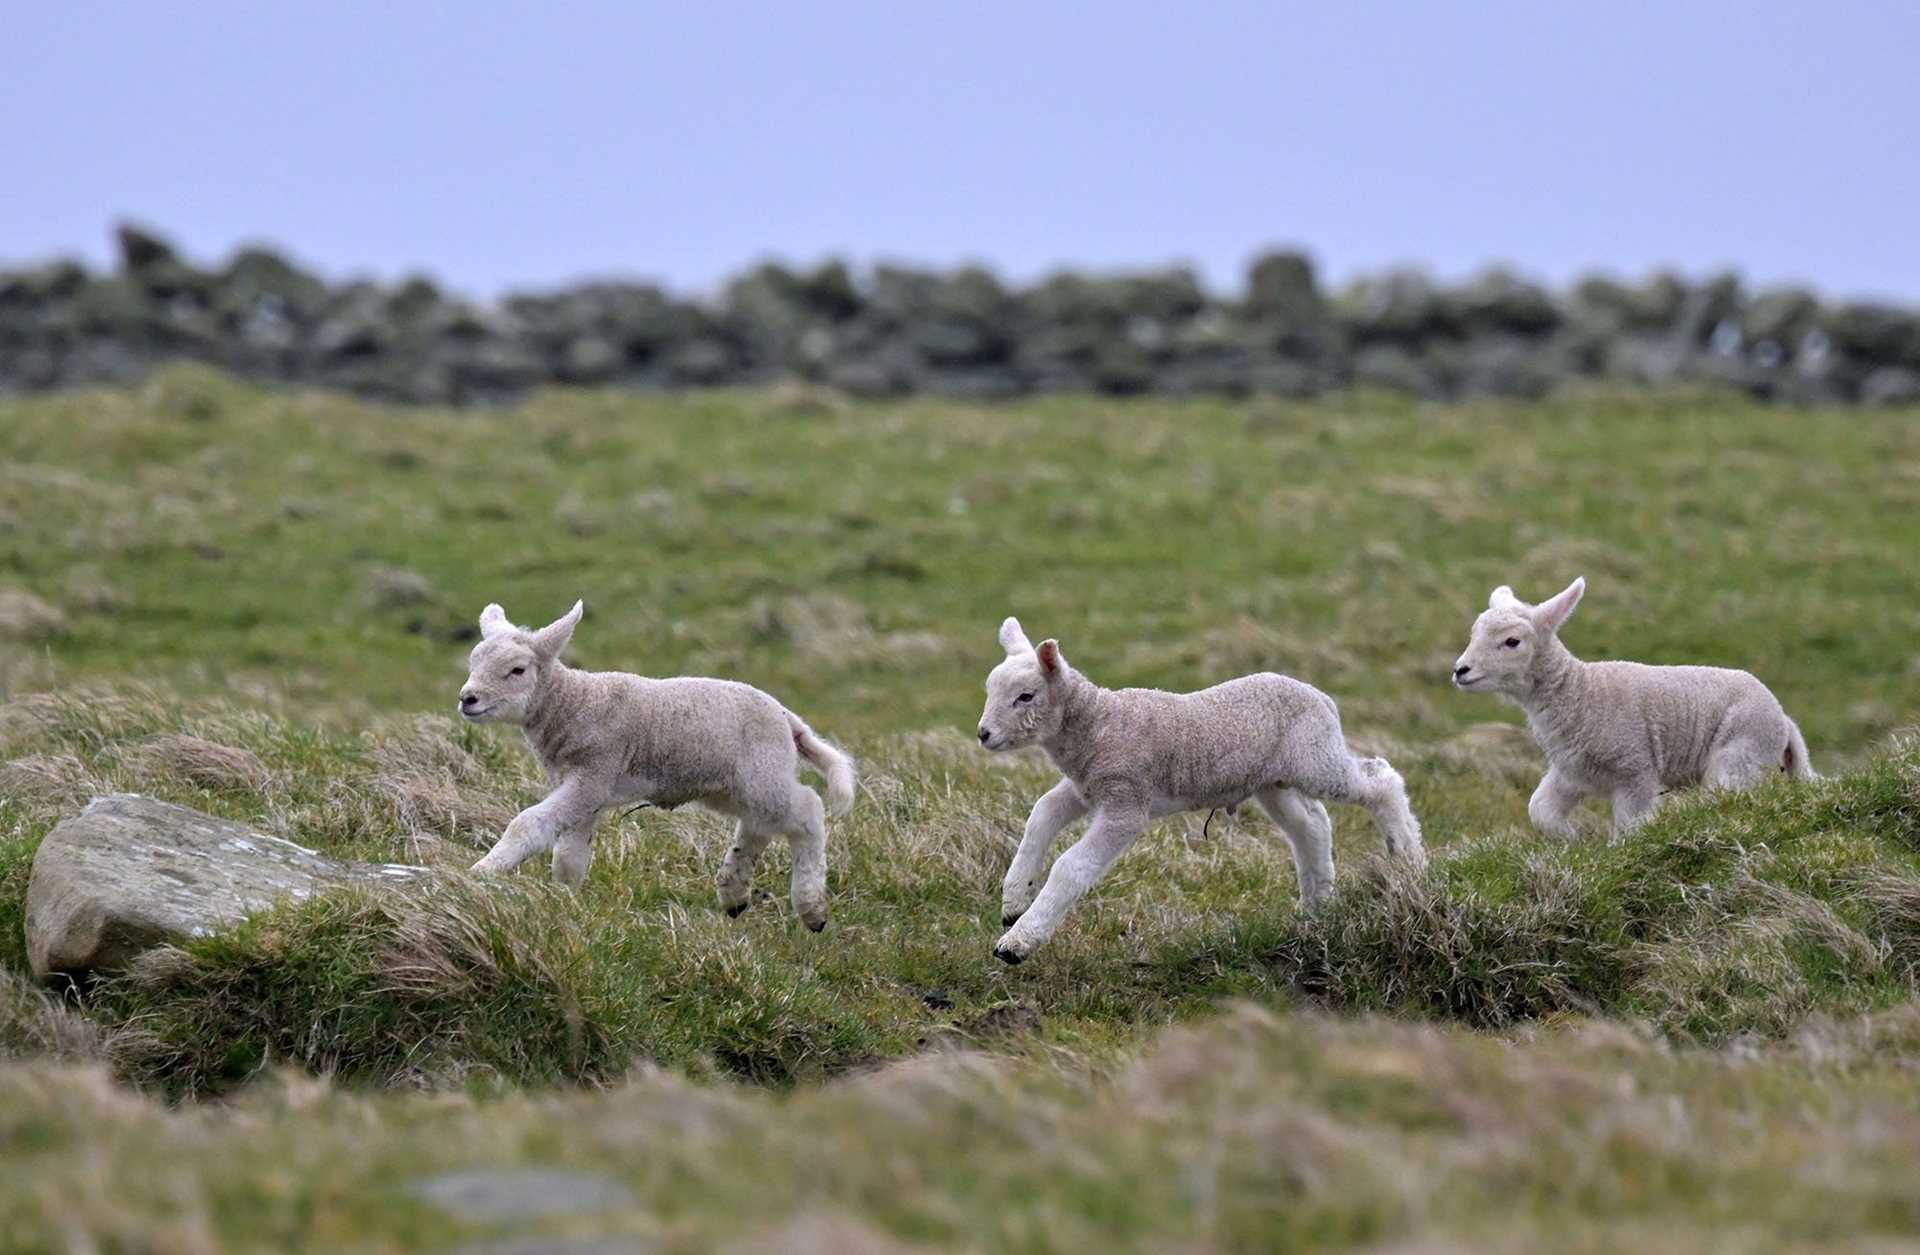 three baby lambs running in a field